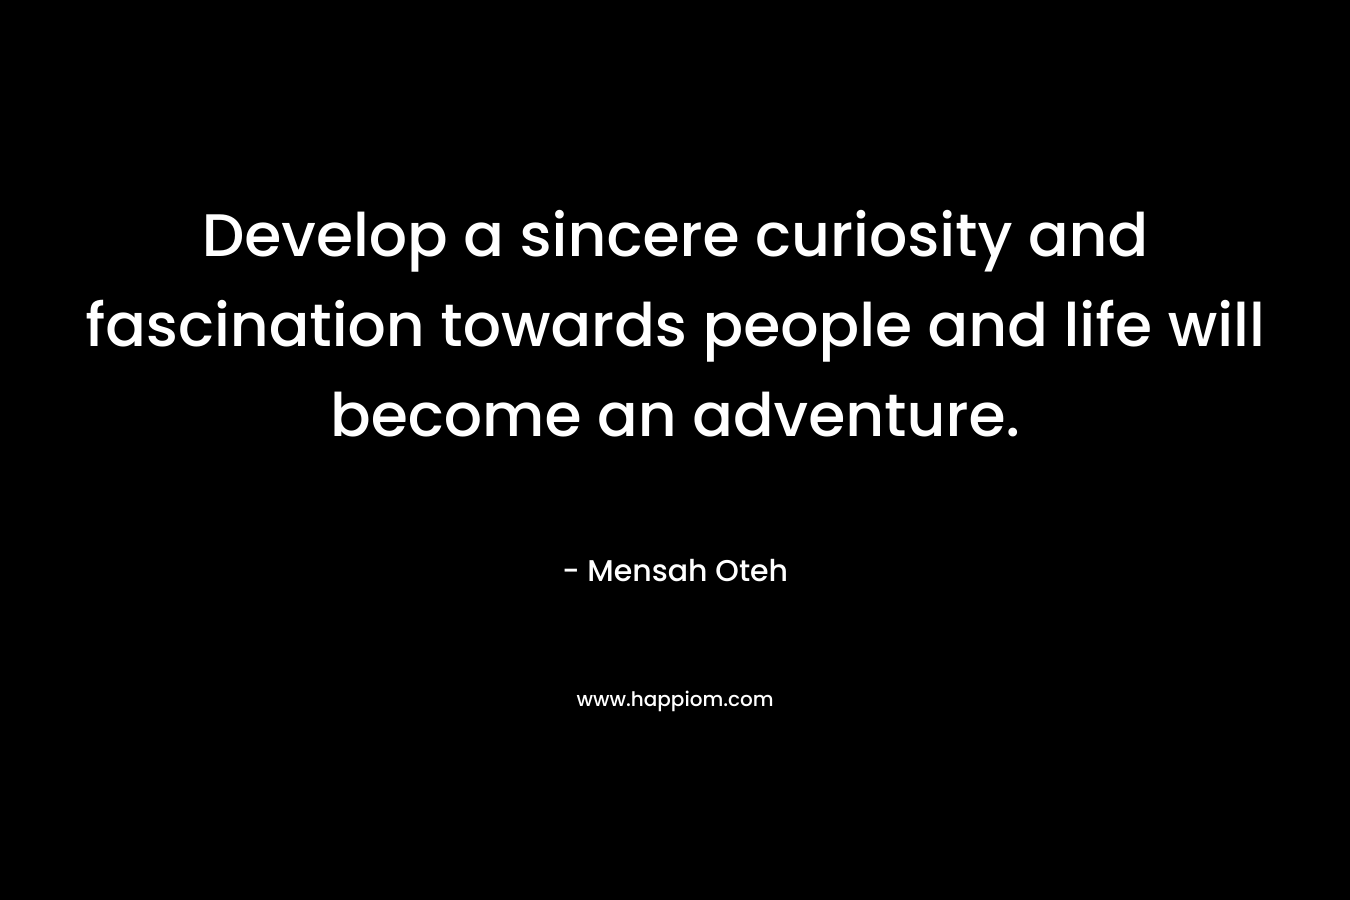 Develop a sincere curiosity and fascination towards people and life will become an adventure.